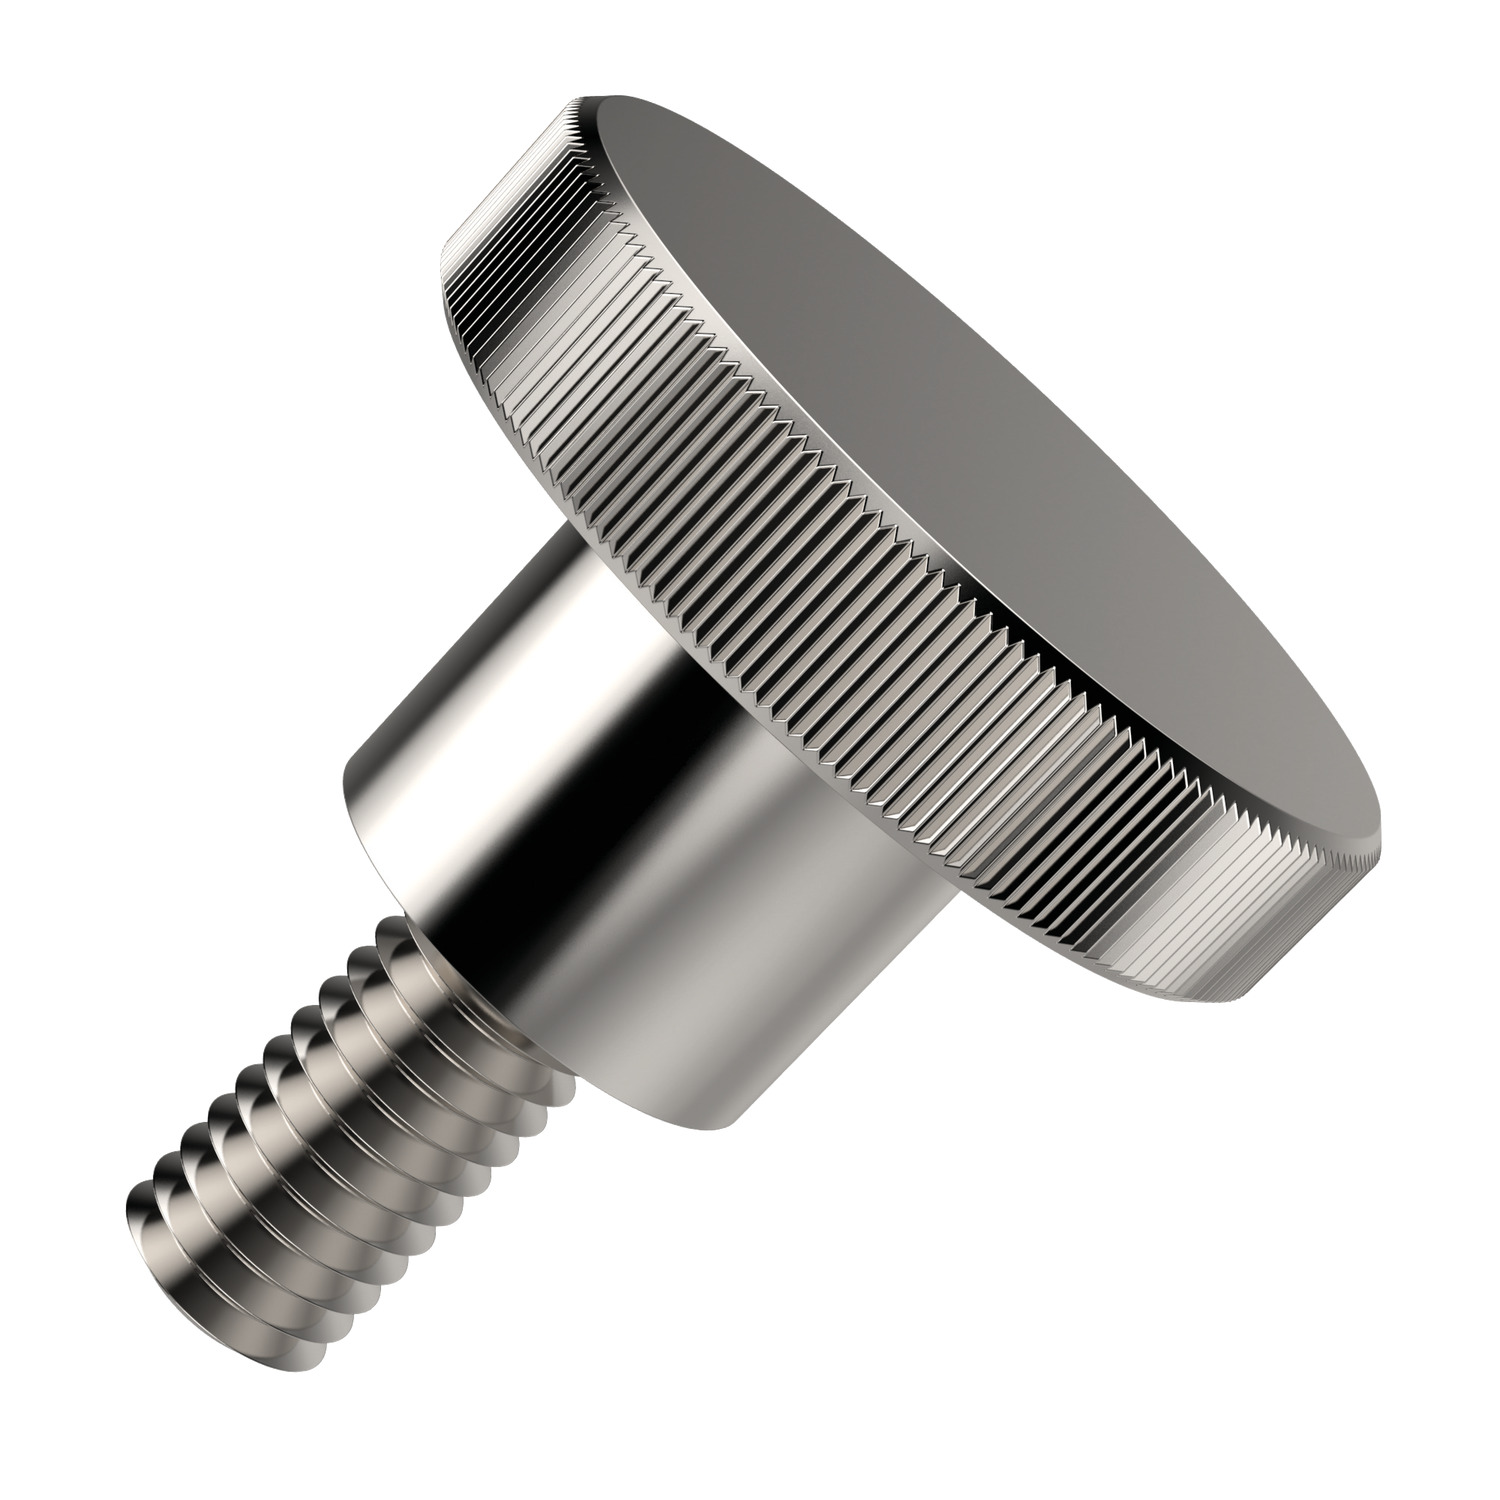 Product 37150, Knurled Thumb Screws stainless steel - DIN 464 / 